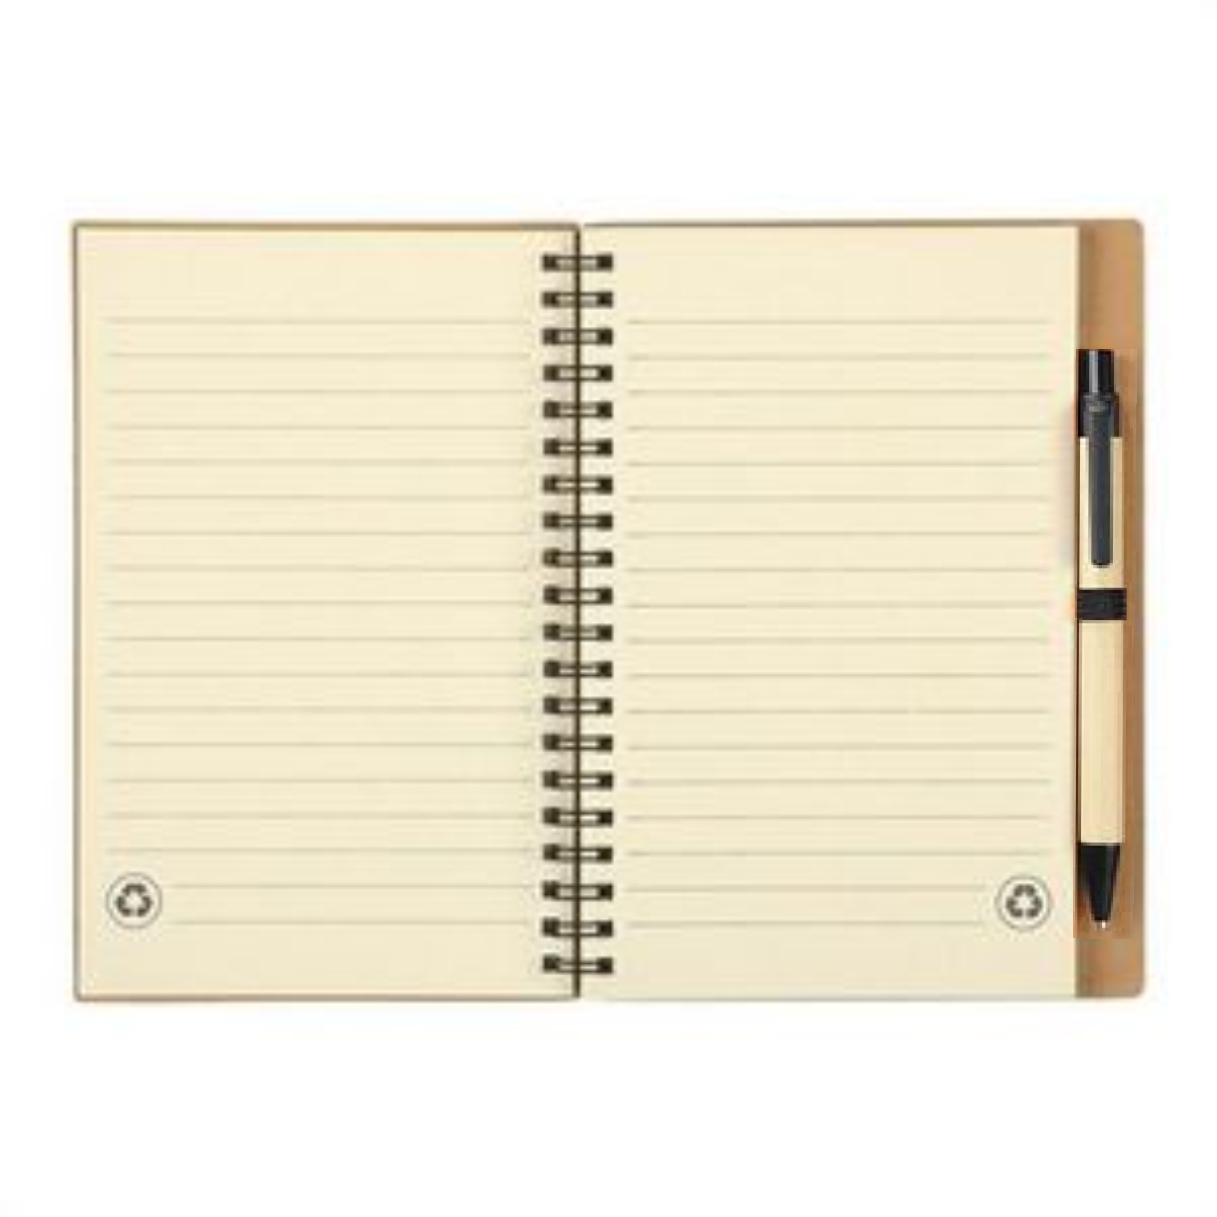 5" X 7" Eco Spiral Notebook With Pen